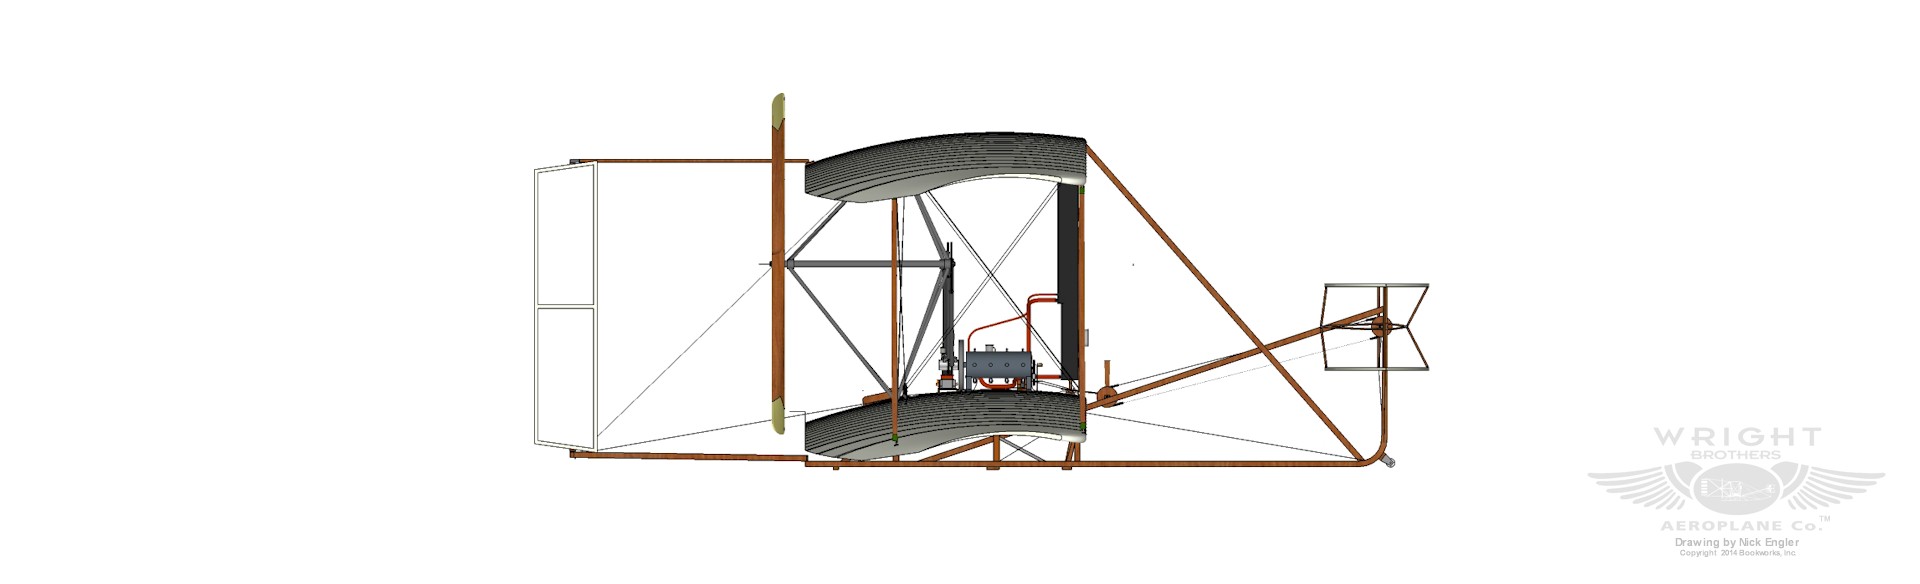 wright flyer clipart - photo #30